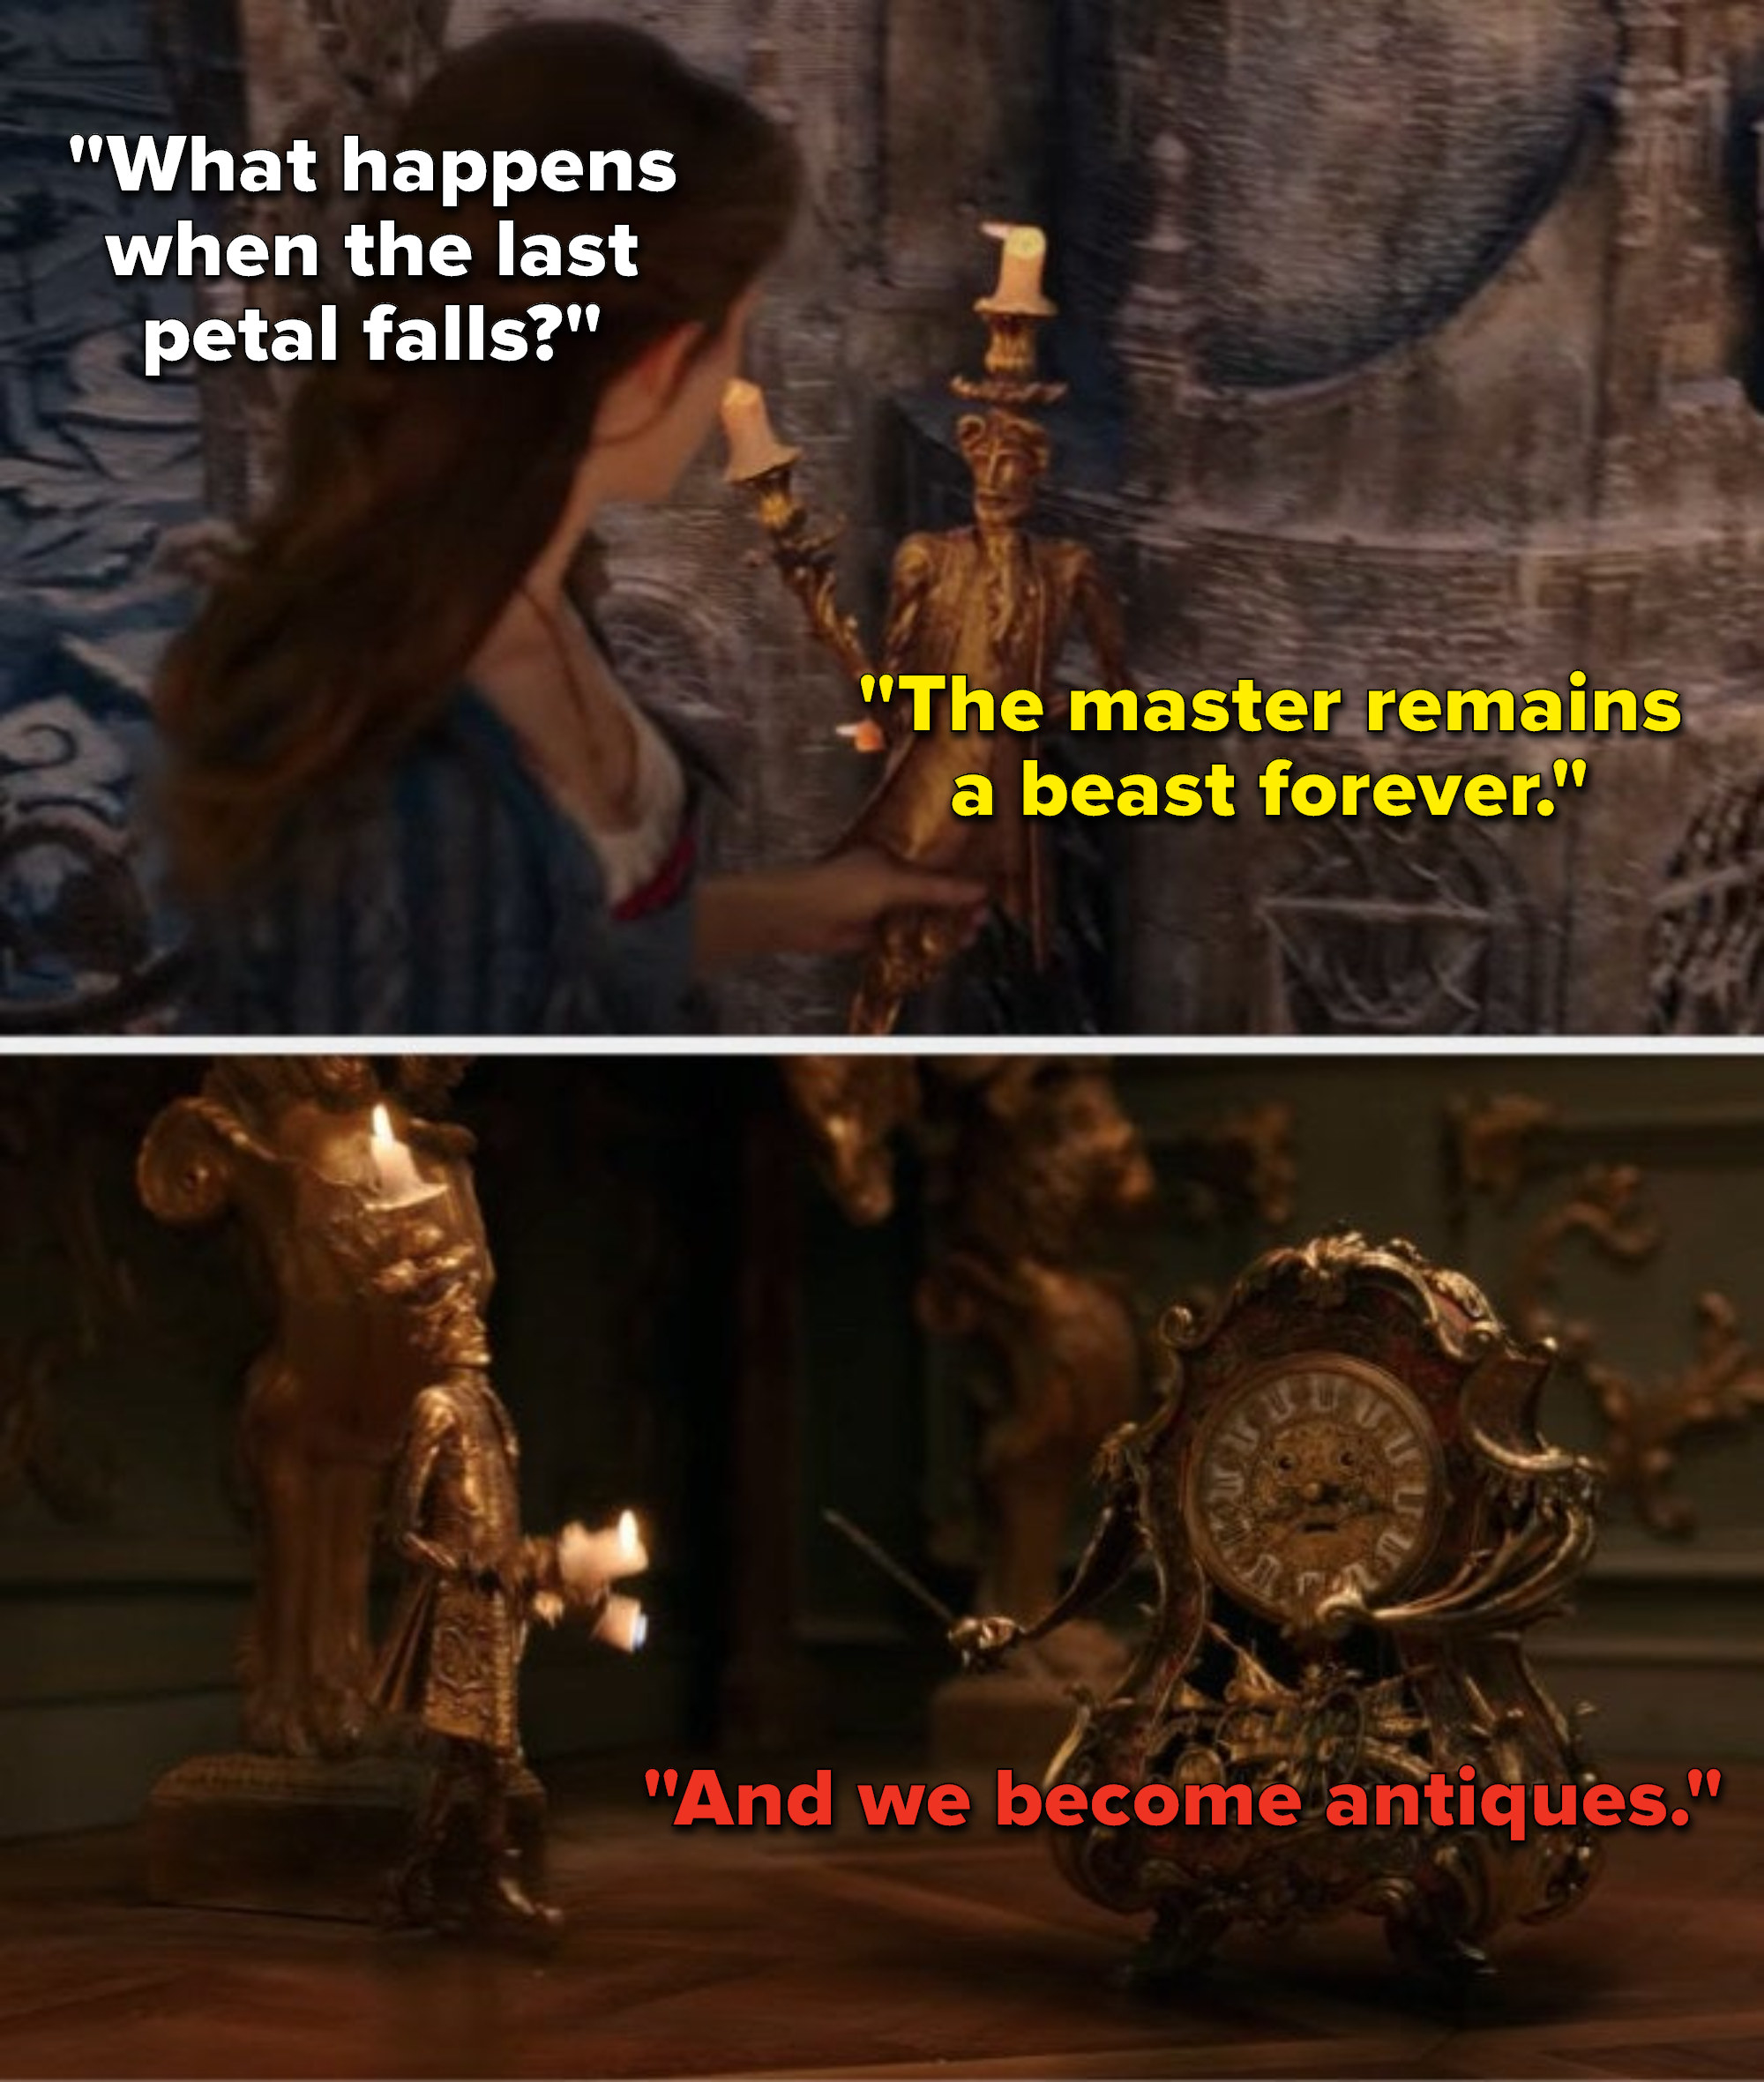 In the live-action remake, Belle asks Lumière &quot;What happens when the last petal falls,&quot; Lumière says, &quot;The master remains a beast forever,&quot; and Cogsworth says, &quot;And we become antiques&quot;